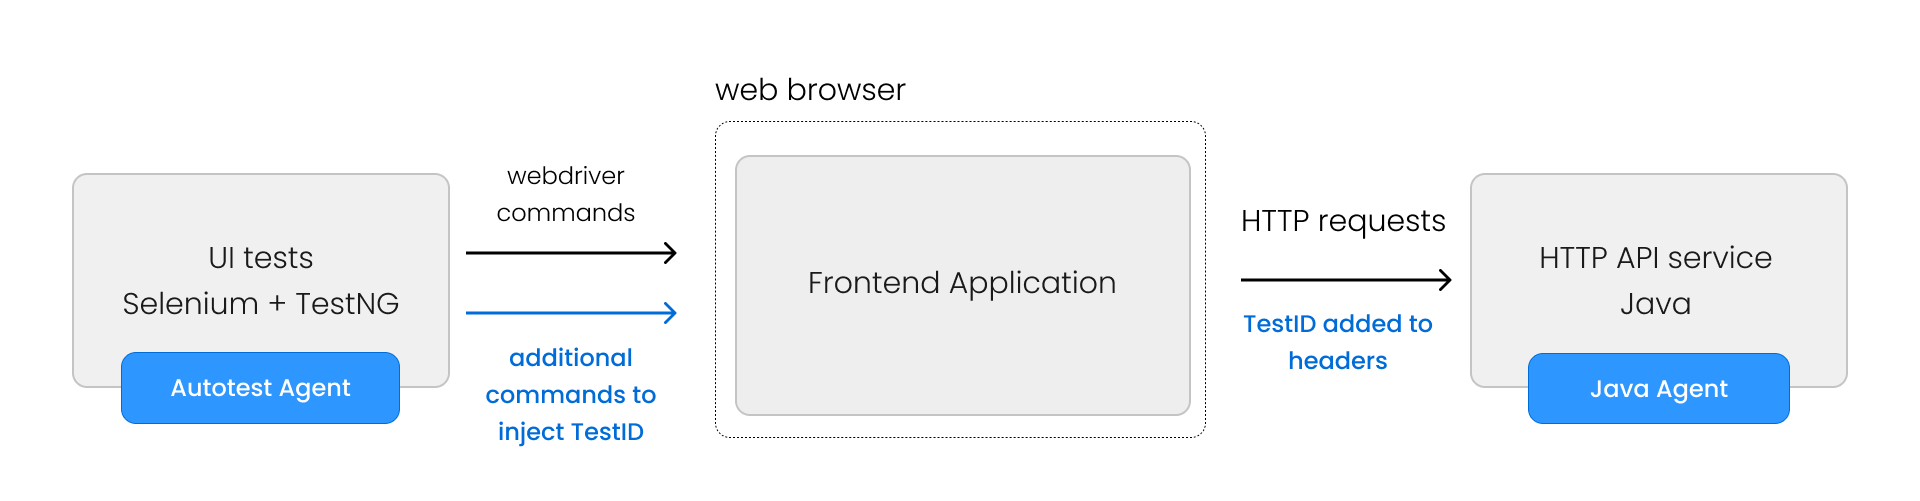  A diagram: On the left there is 'UI Tests' entity with 'Autotest Agent' box attached to it. In the middle there is 'web browser' entity with 'frontend application' nested inside. They are connected with two arrows: one is labeled 'WebDriver Commands', other is labeled 'Additional commands to inject TestID' On the right there is 'HTTP API' entity with 'Agent' box attached to it. An arrow labeled 'HTTP requests + TestID added to headers' connects browser and HTTP API Service 